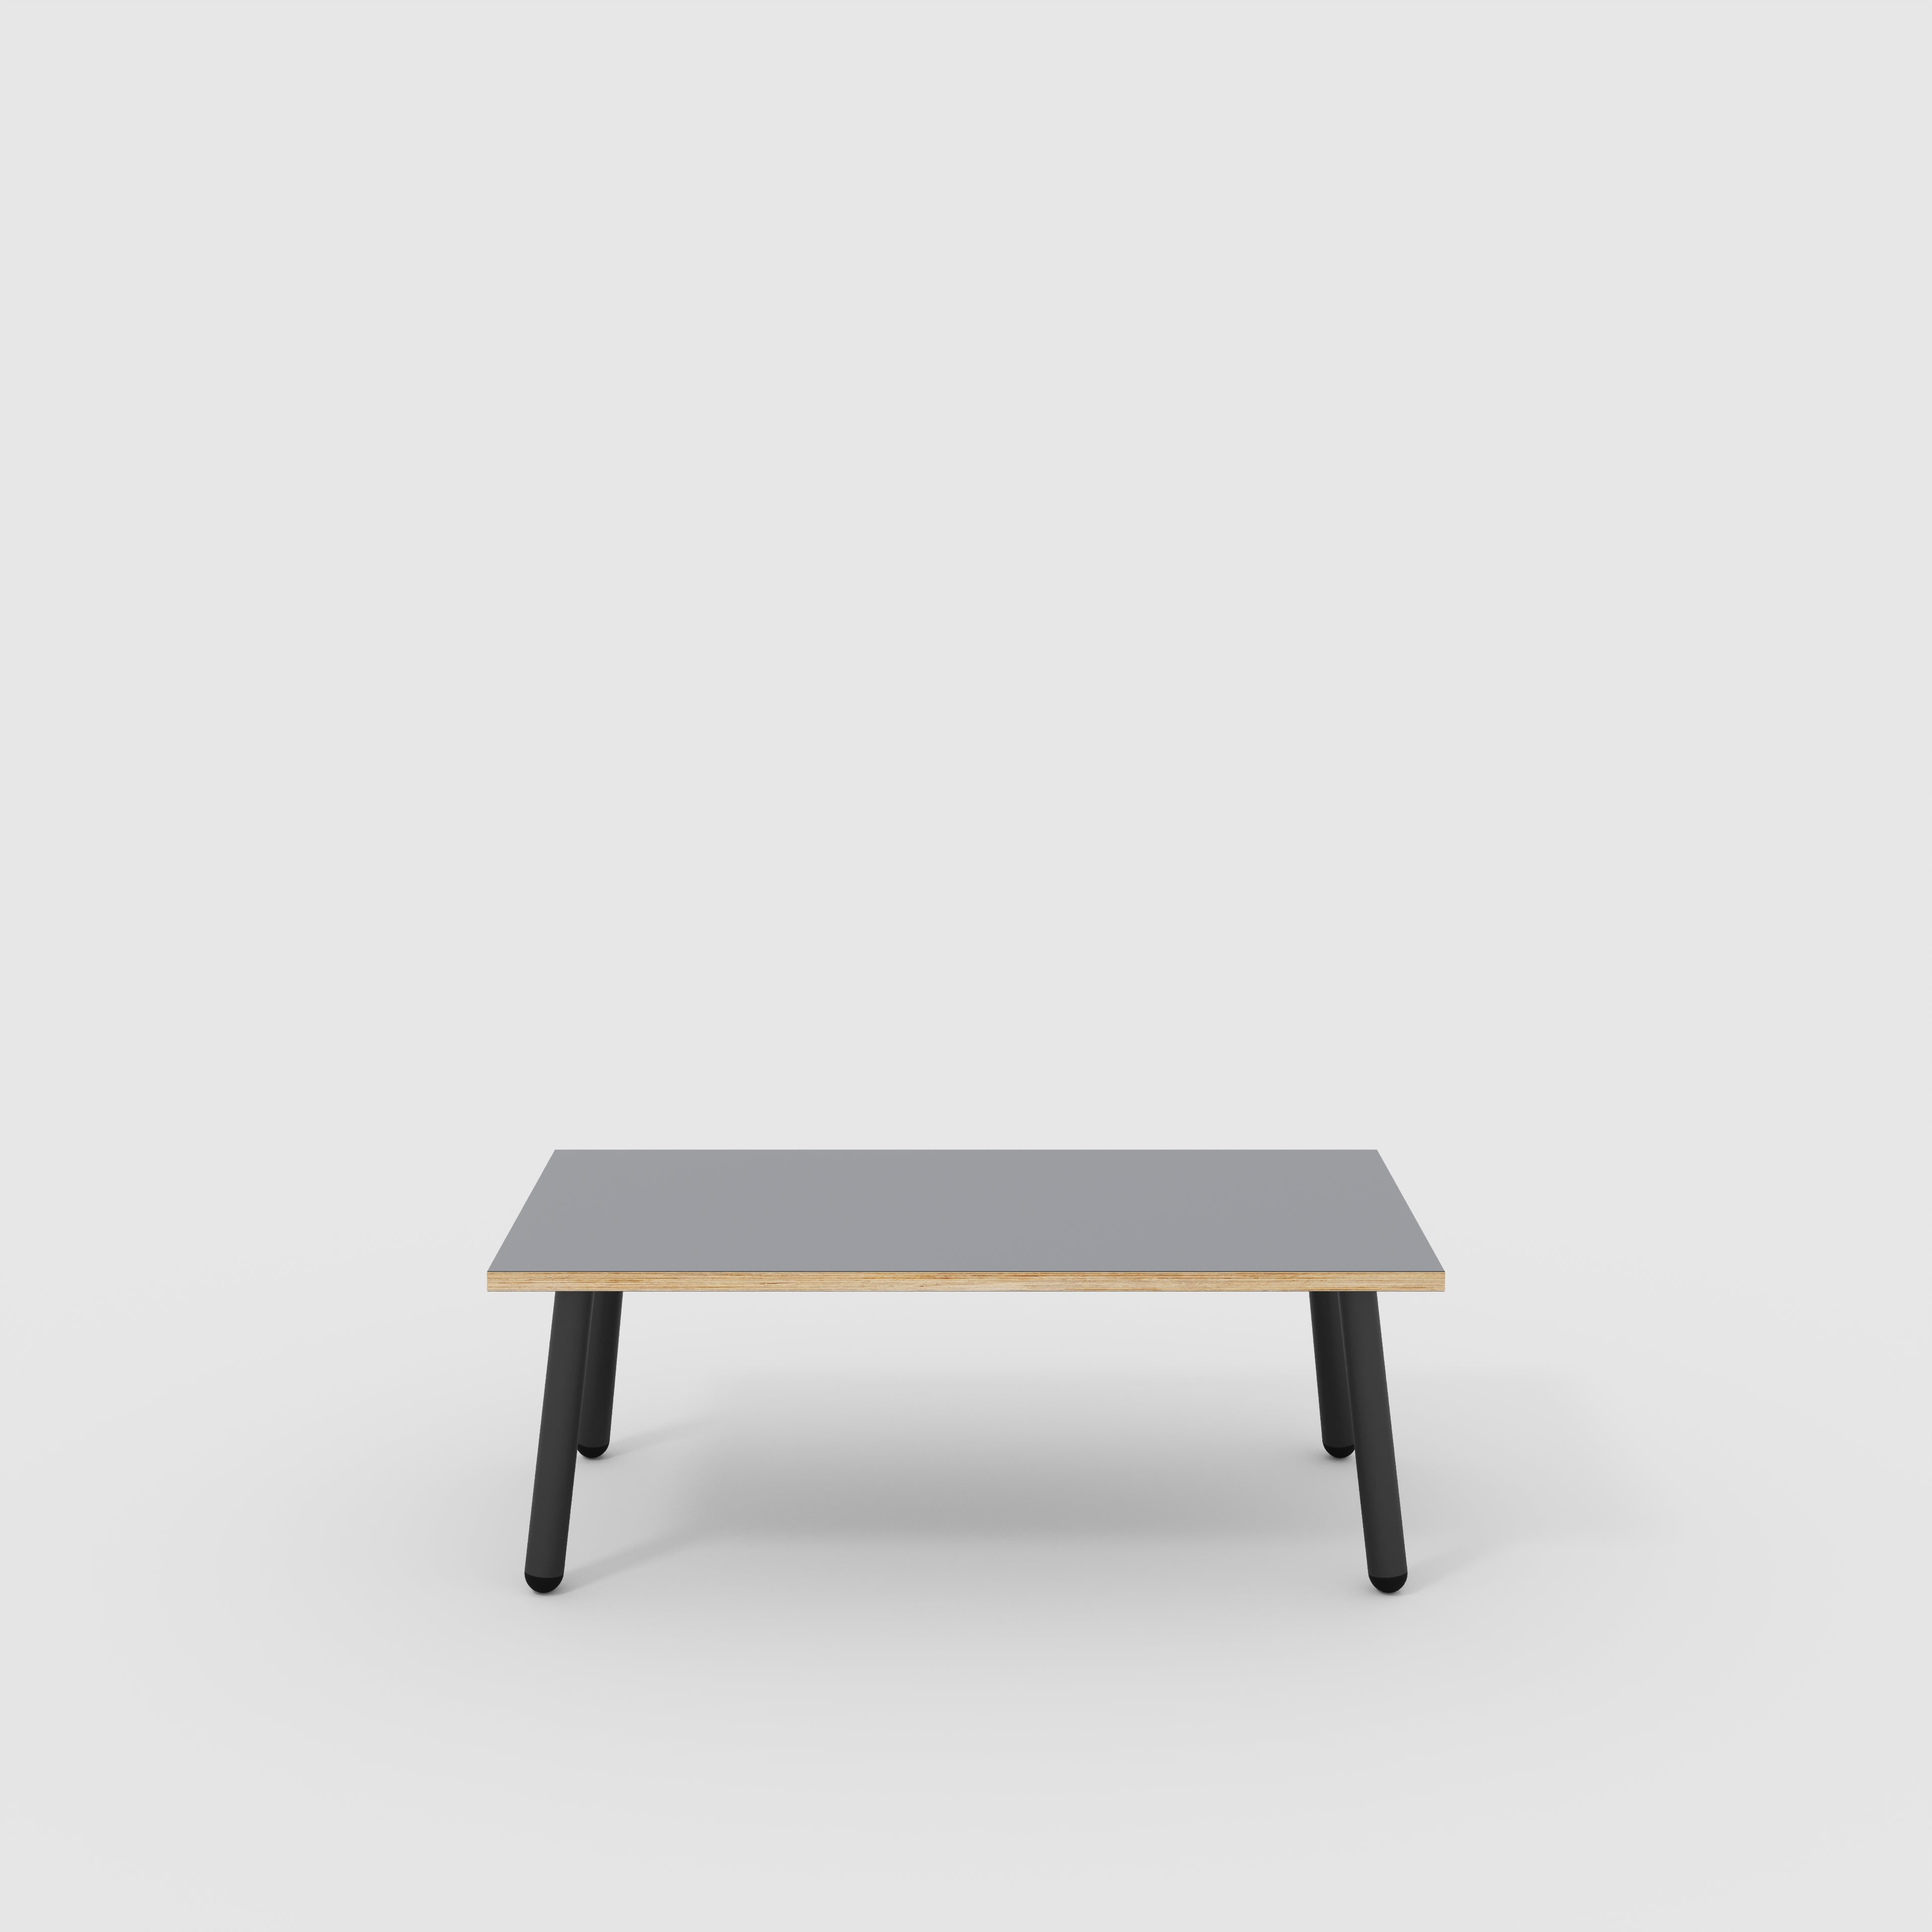 Coffee Table with Black Round Single Pin Legs - Formica Tornado Grey - 1200(w) x 600(d) x 425(h)